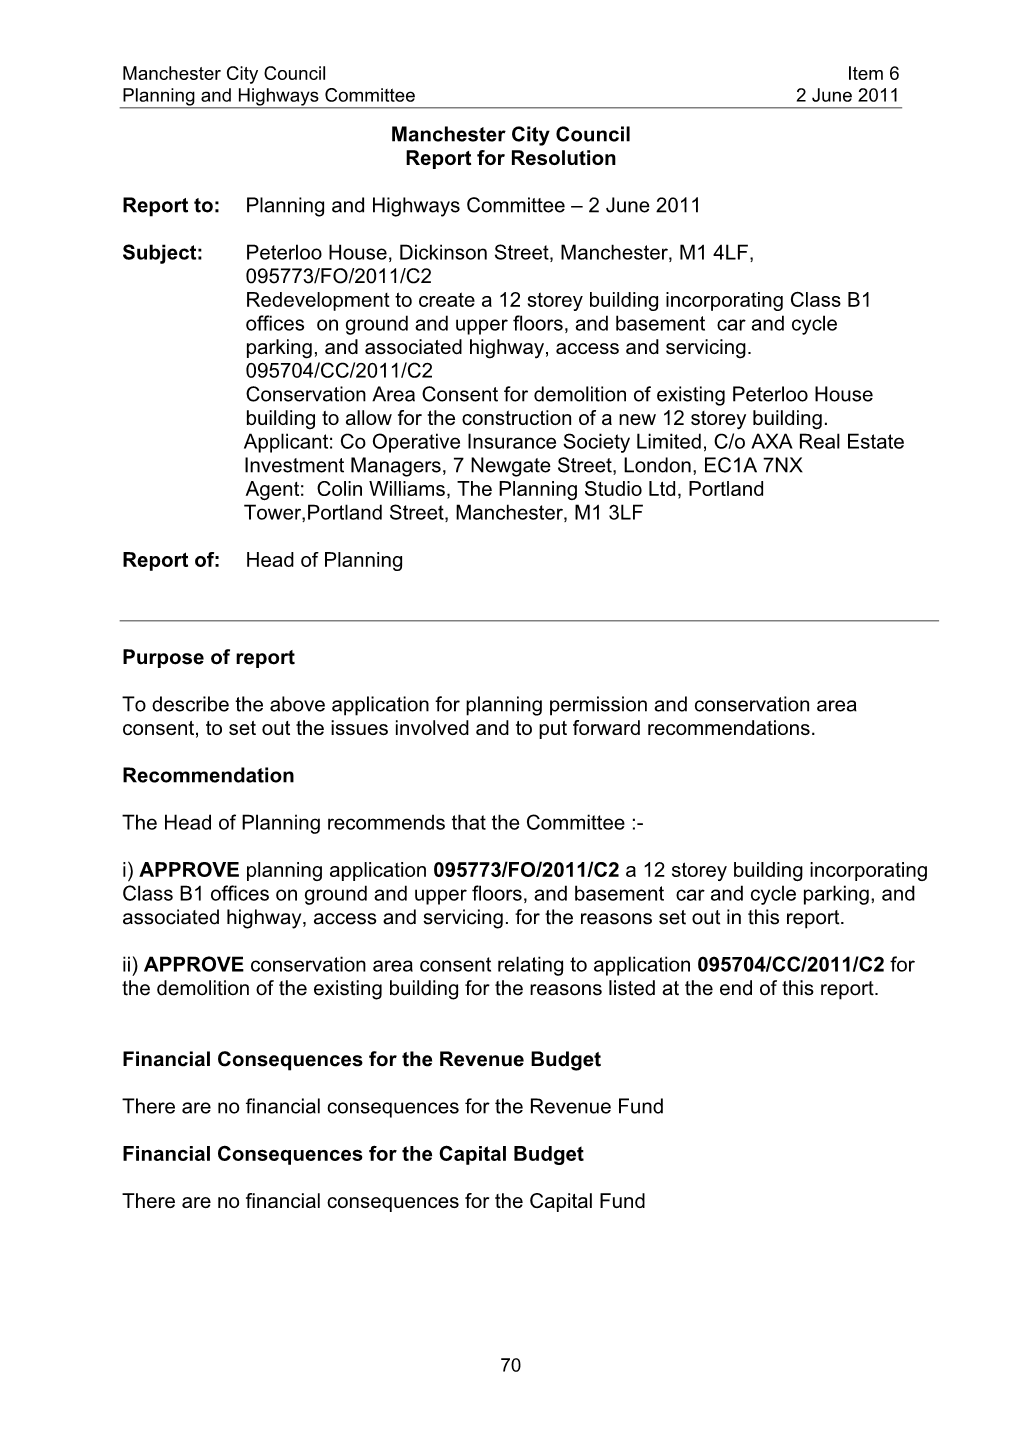 Report on Peterloo House to Planning and Highways Committee on 2